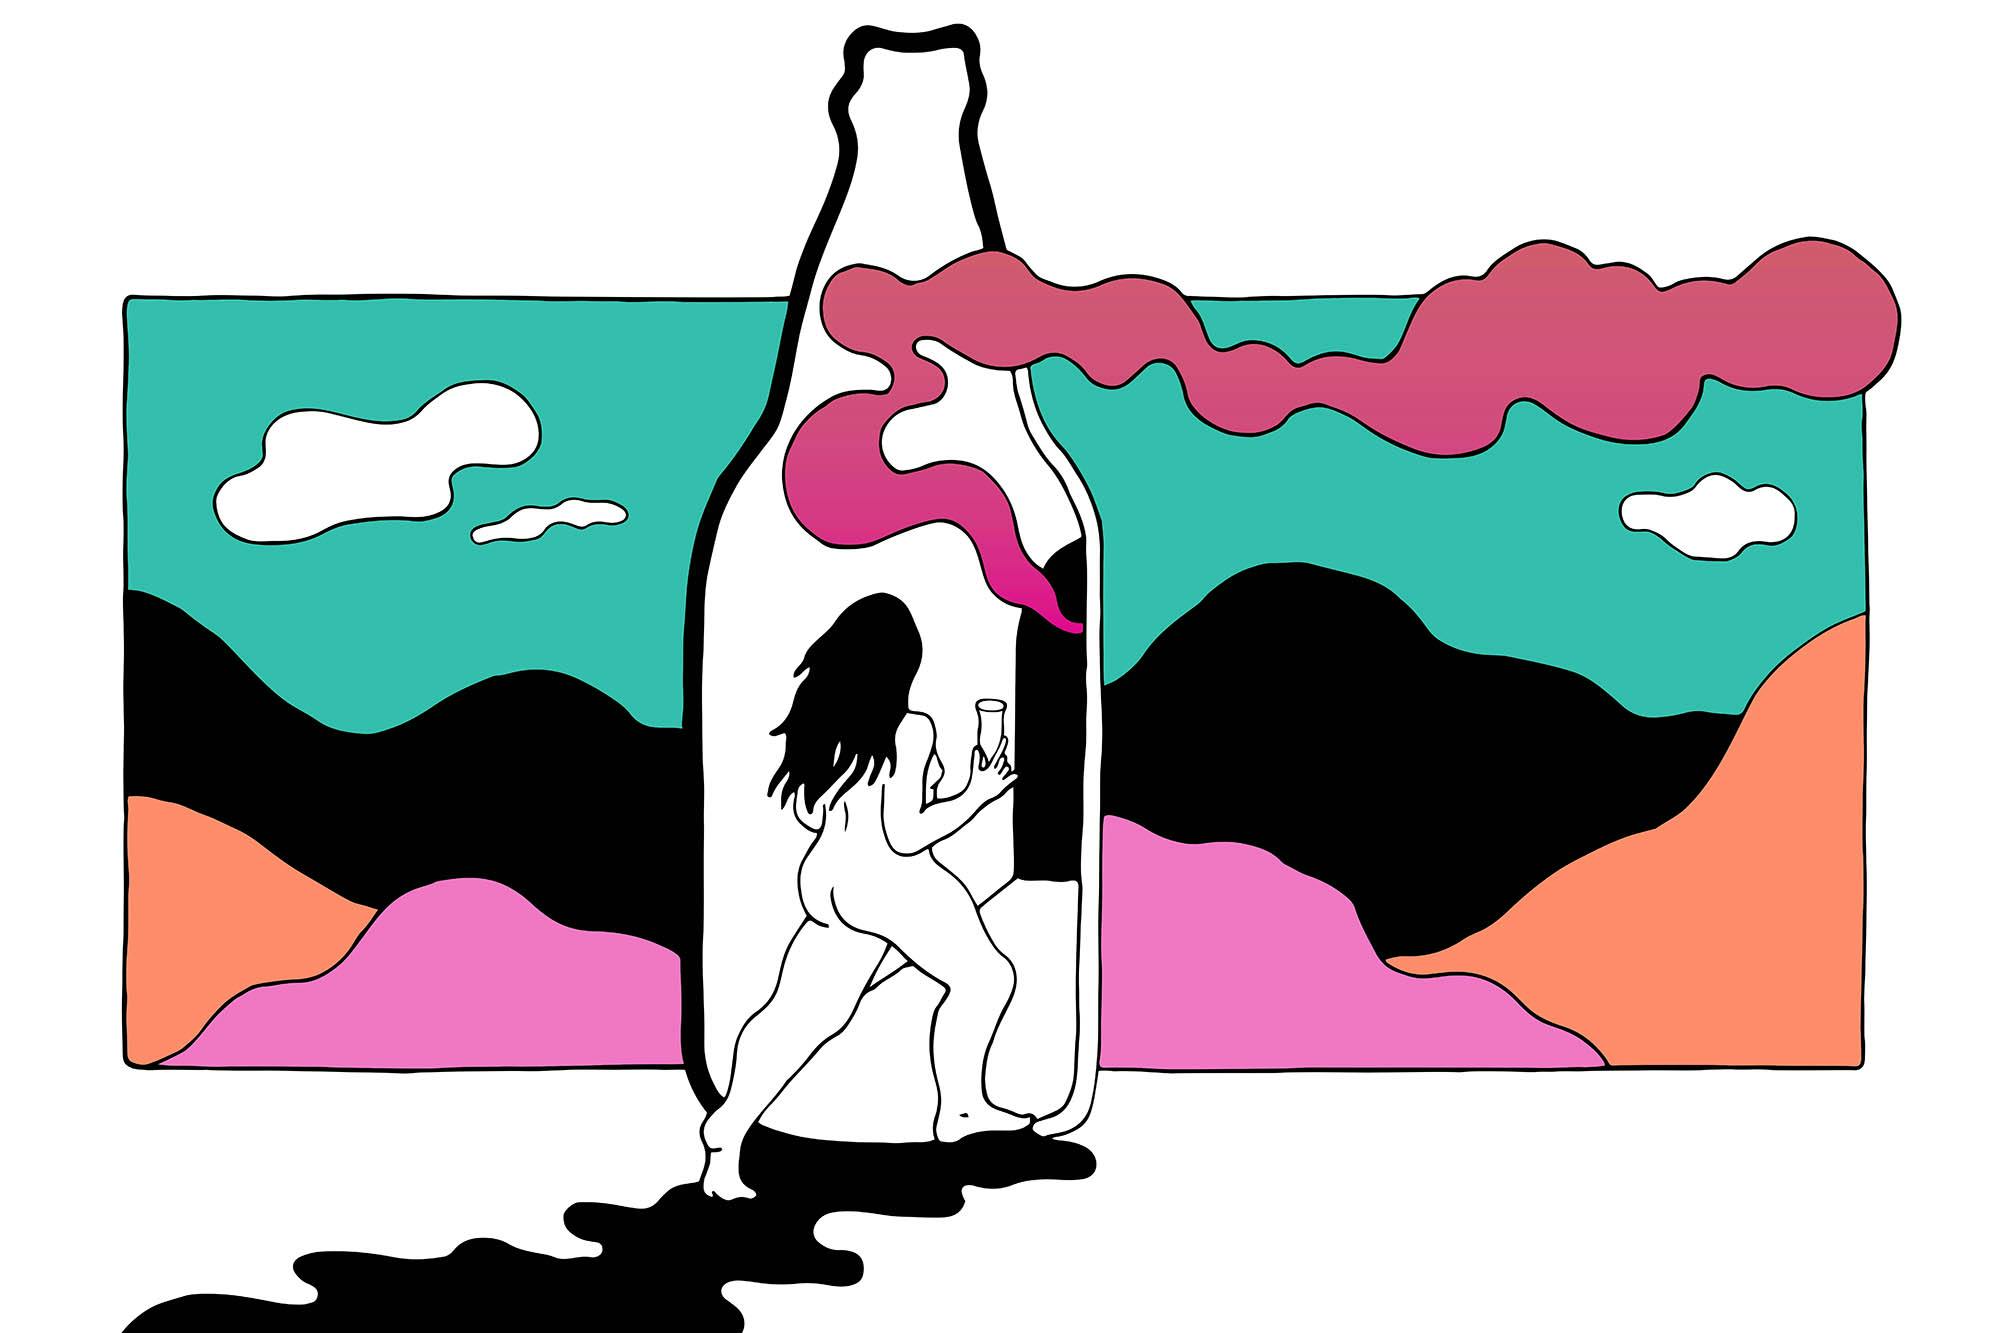 Lady holding glass of beer and walking into a portal inside of a beer bottle that continues into the mountains. There is a cloud of purple smoke arising from the portal.